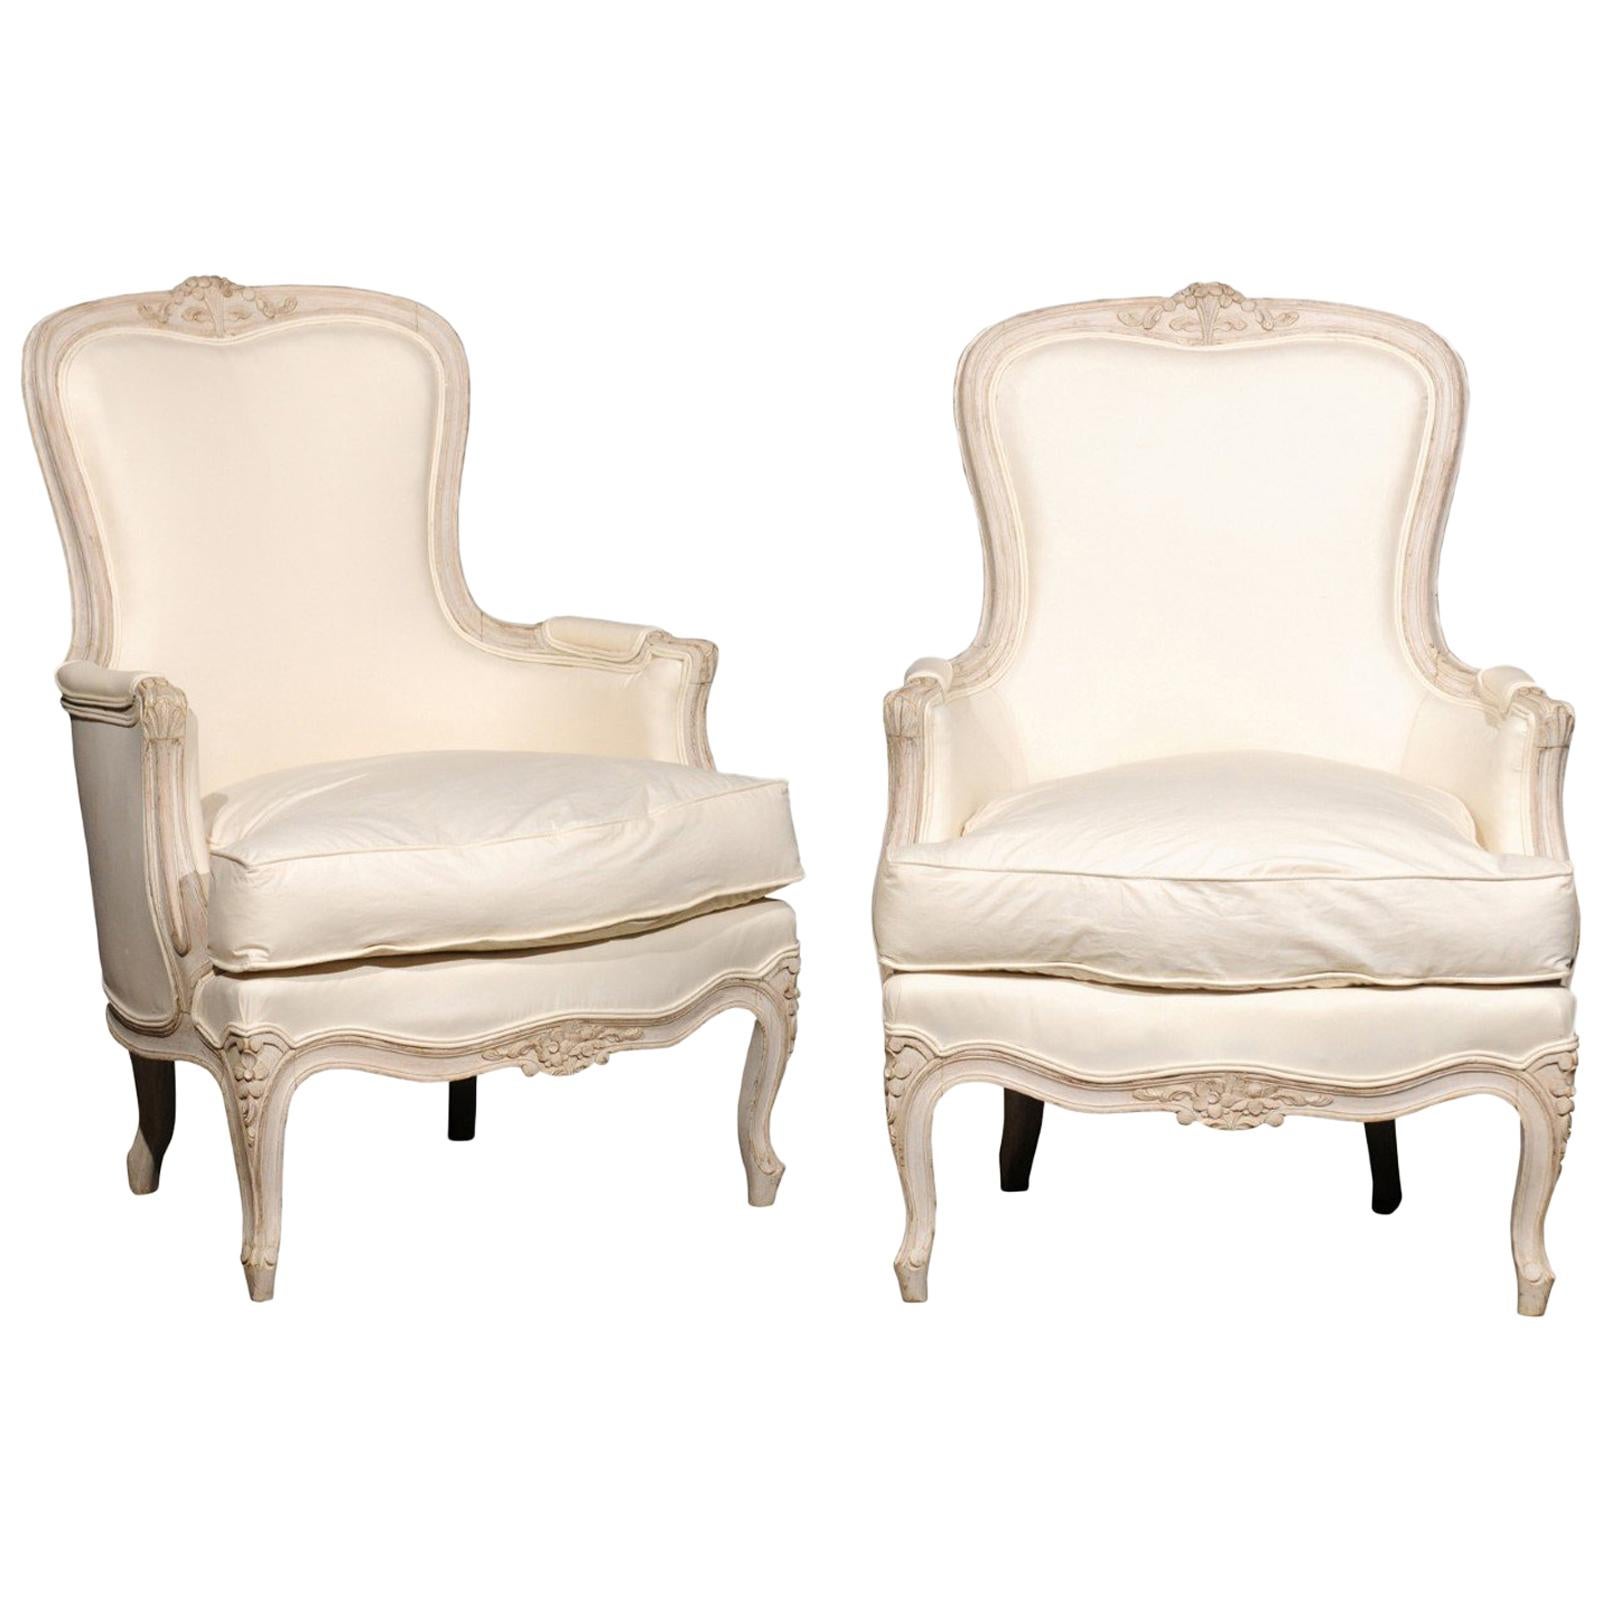 Pair of Swedish Rococo Style Painted Bergères Chairs, circa 1880 with Upholstery